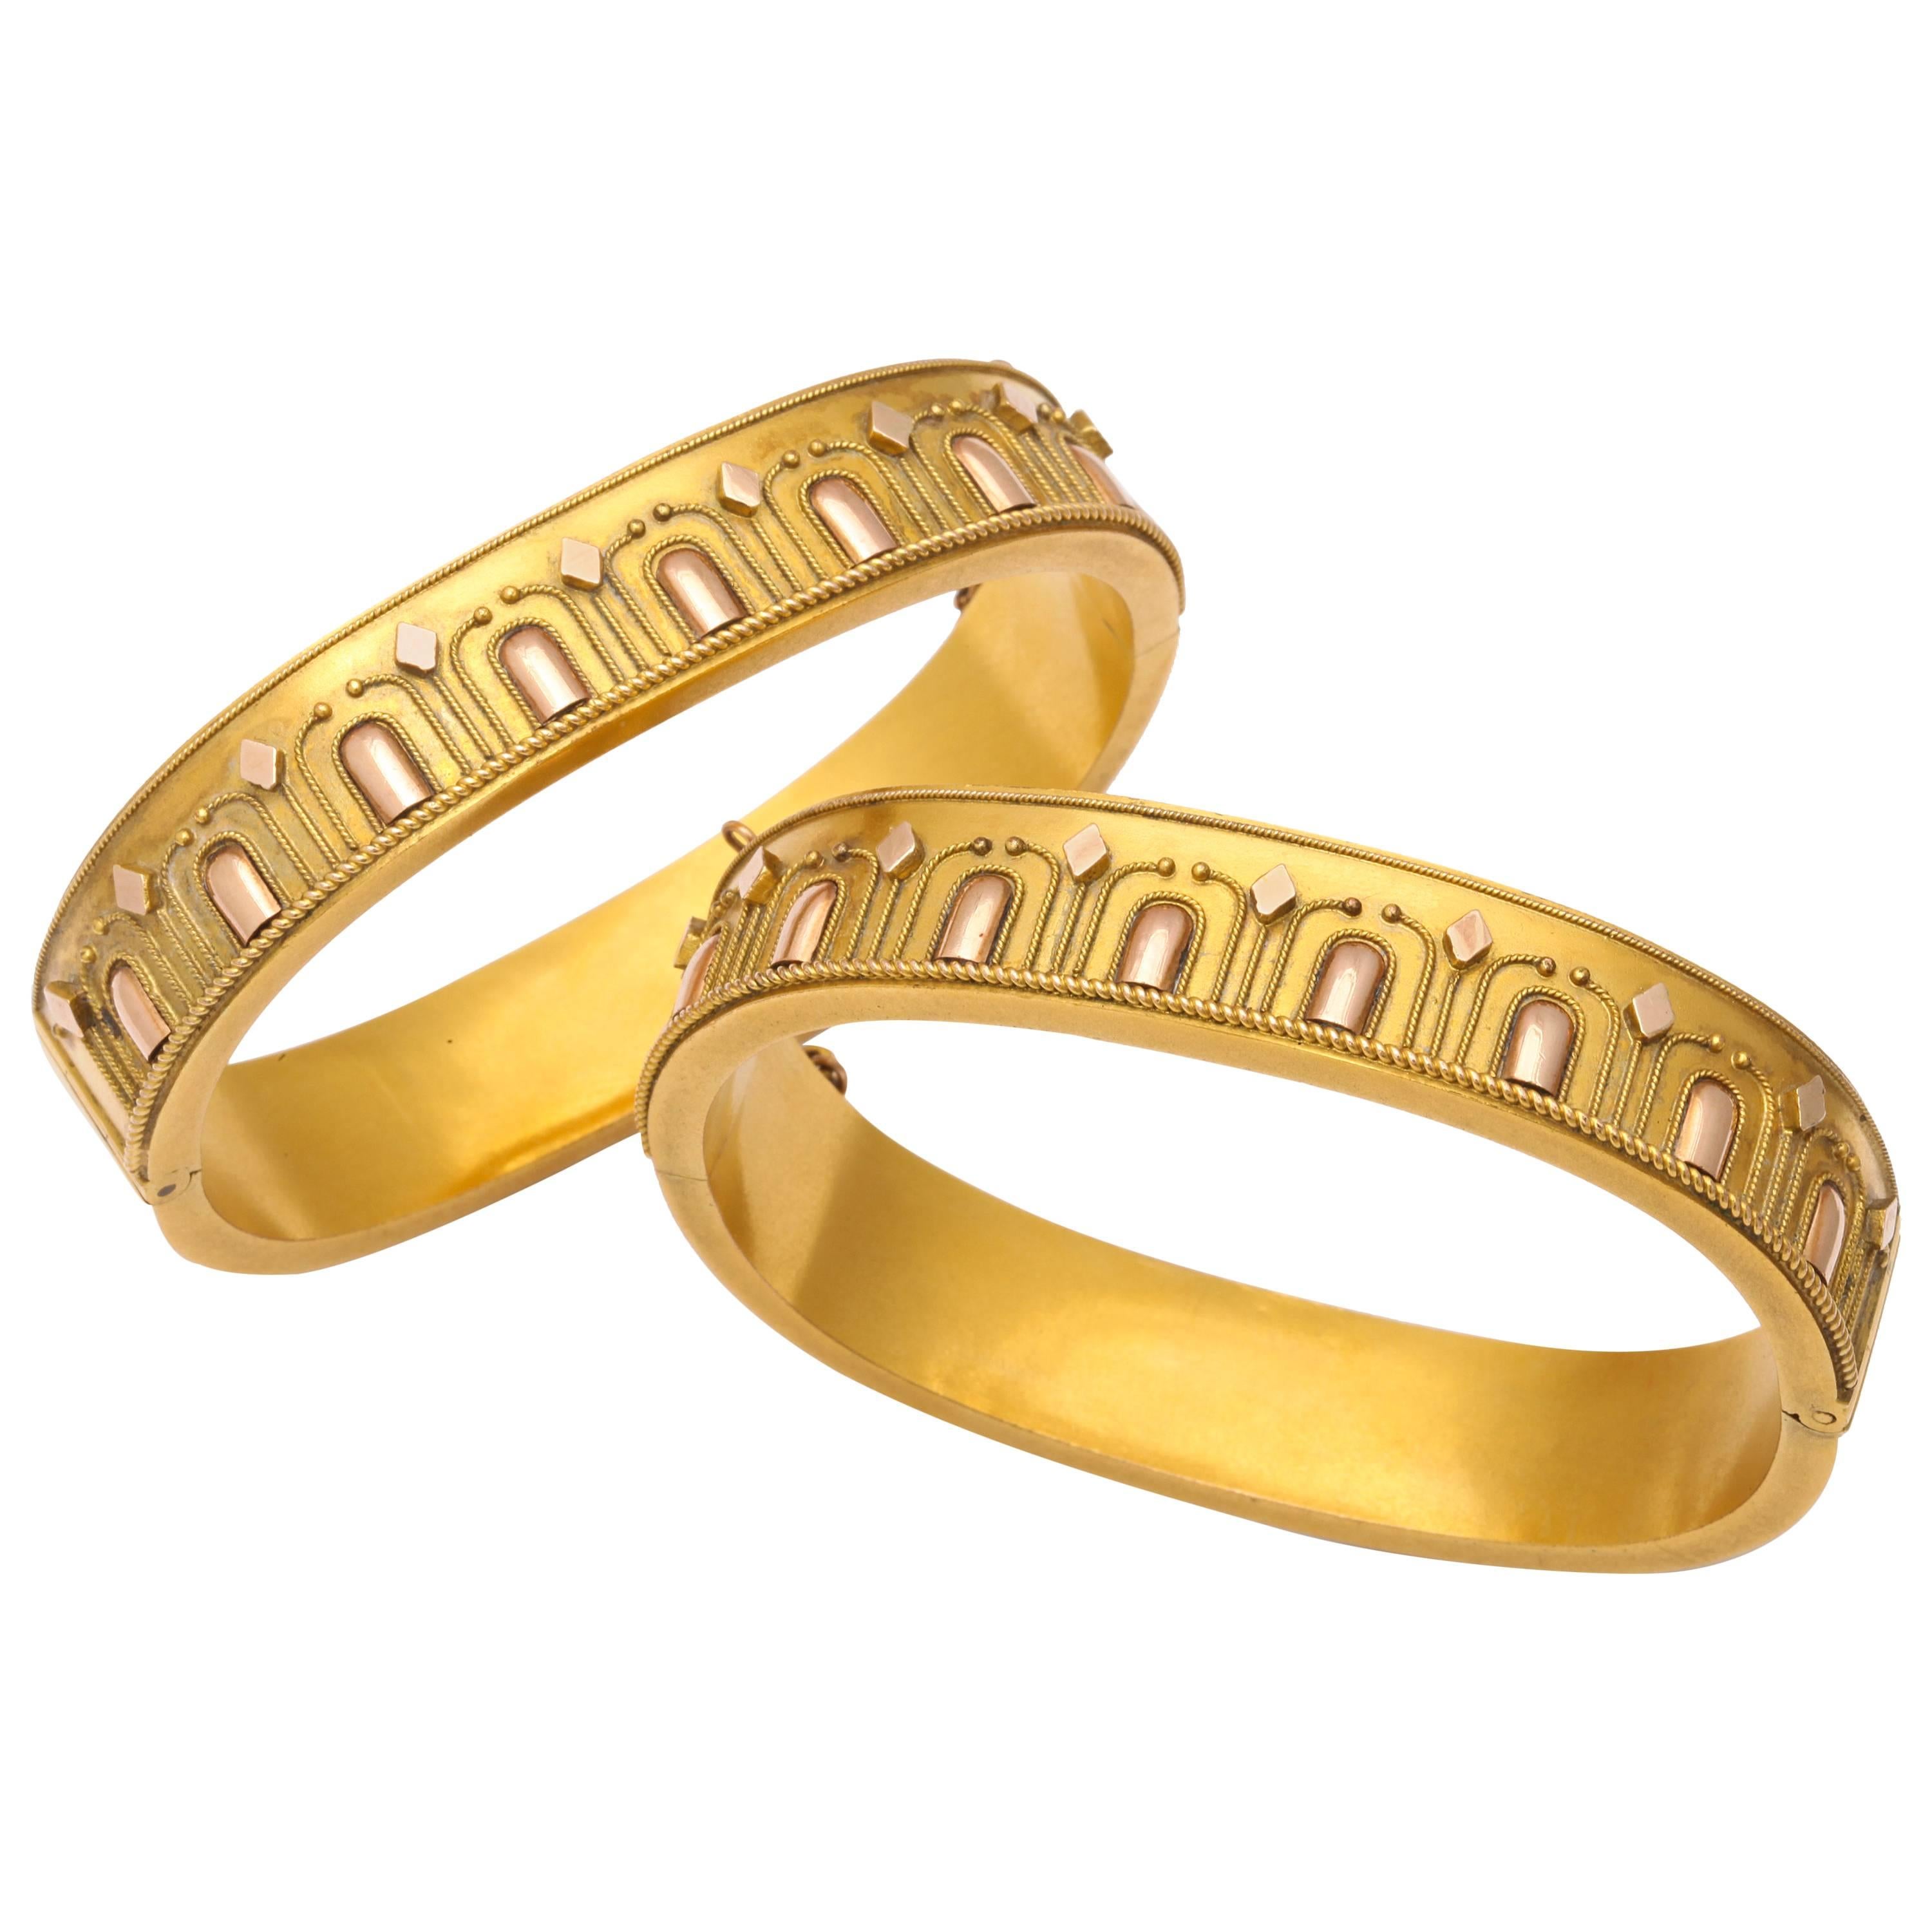 Two by Two: A Pair of Gold Wedding Bracelets